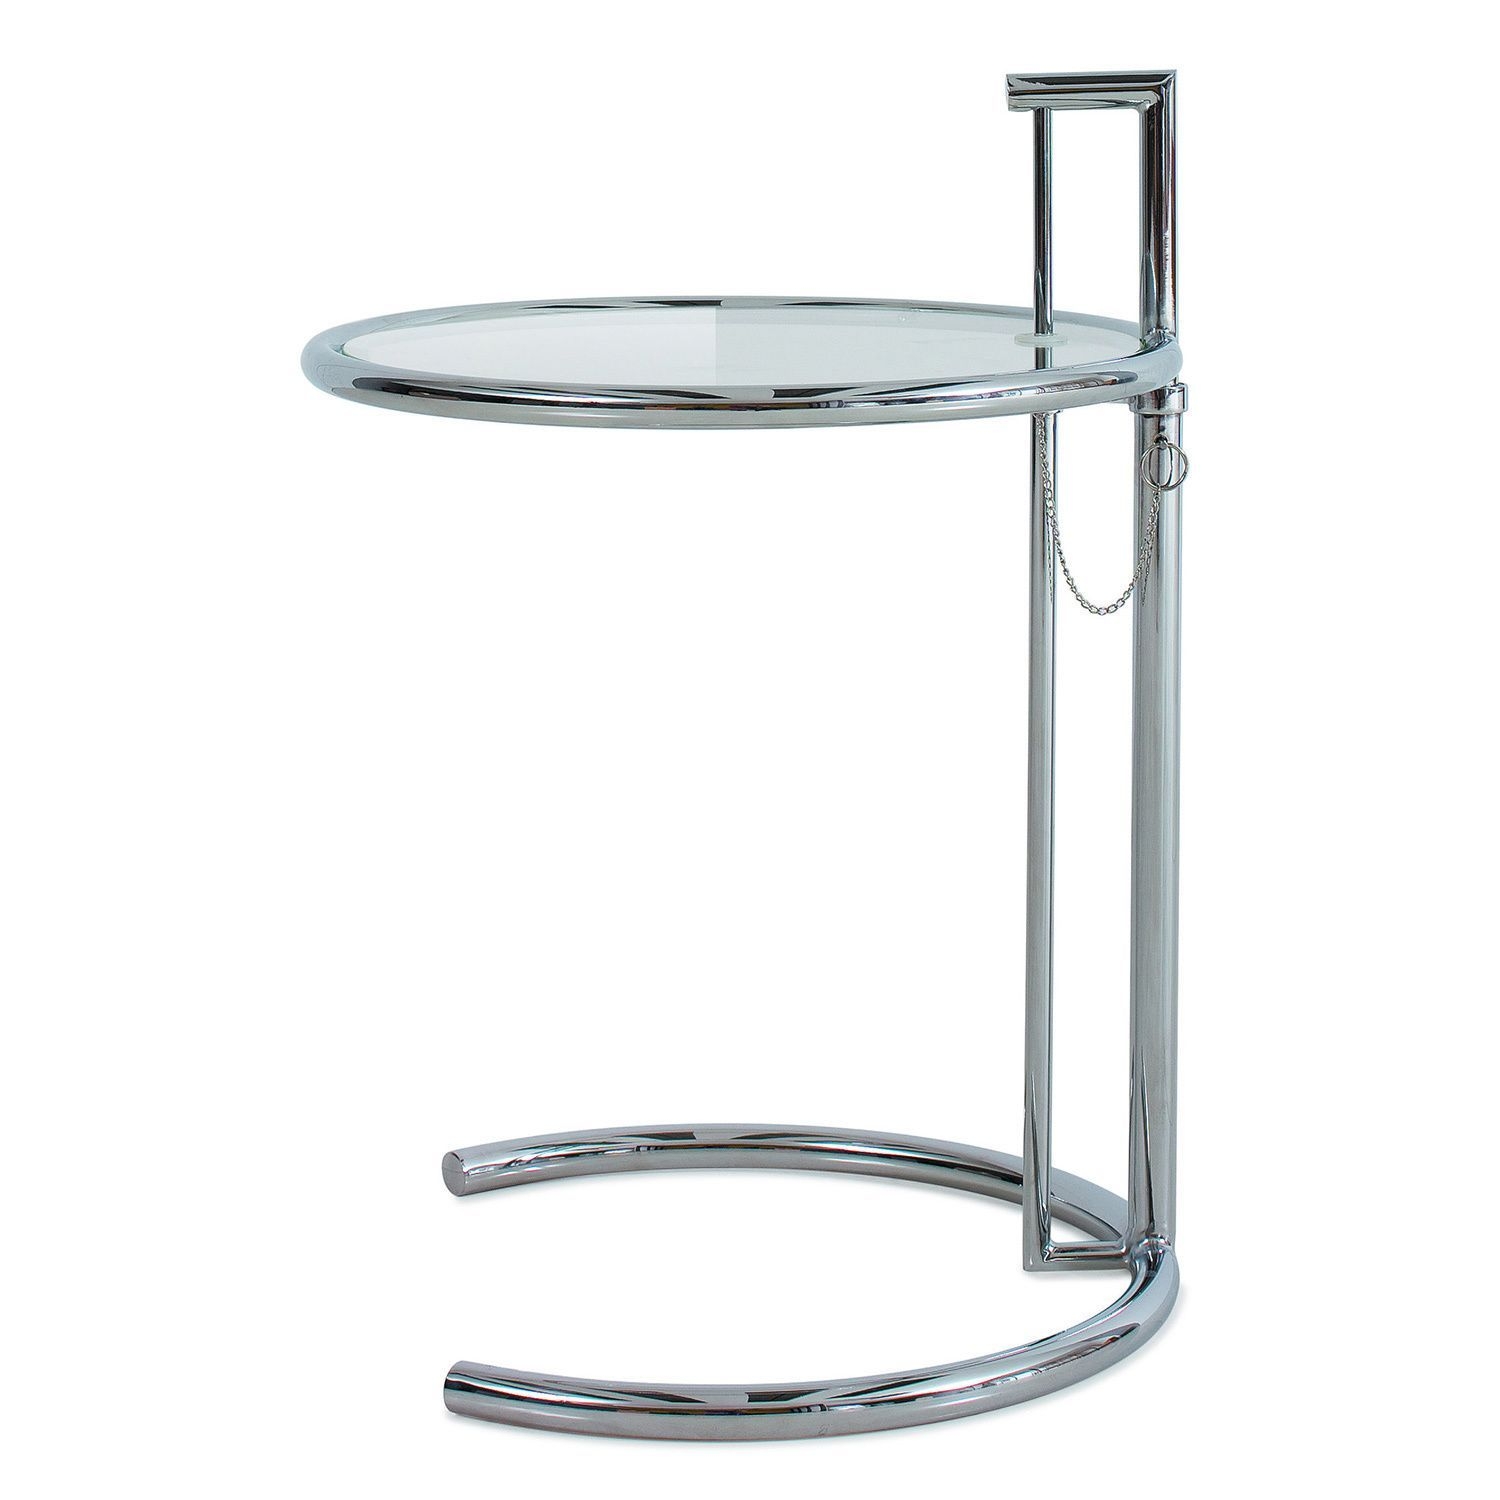 Orion adjustable height side table